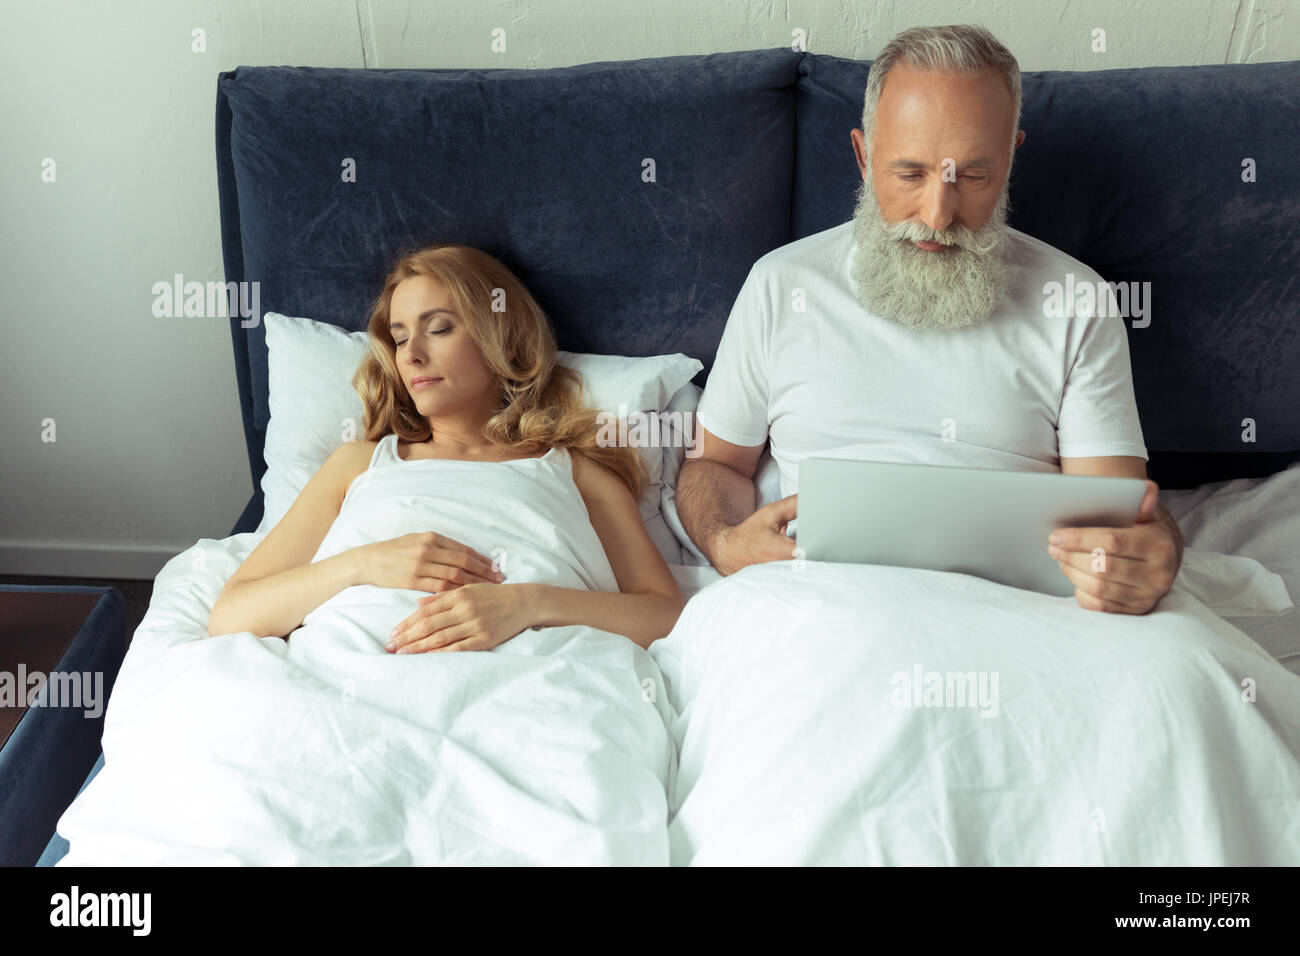 Bearded mature man using laptop in bed while blonde woman sleeping  Stock Photo